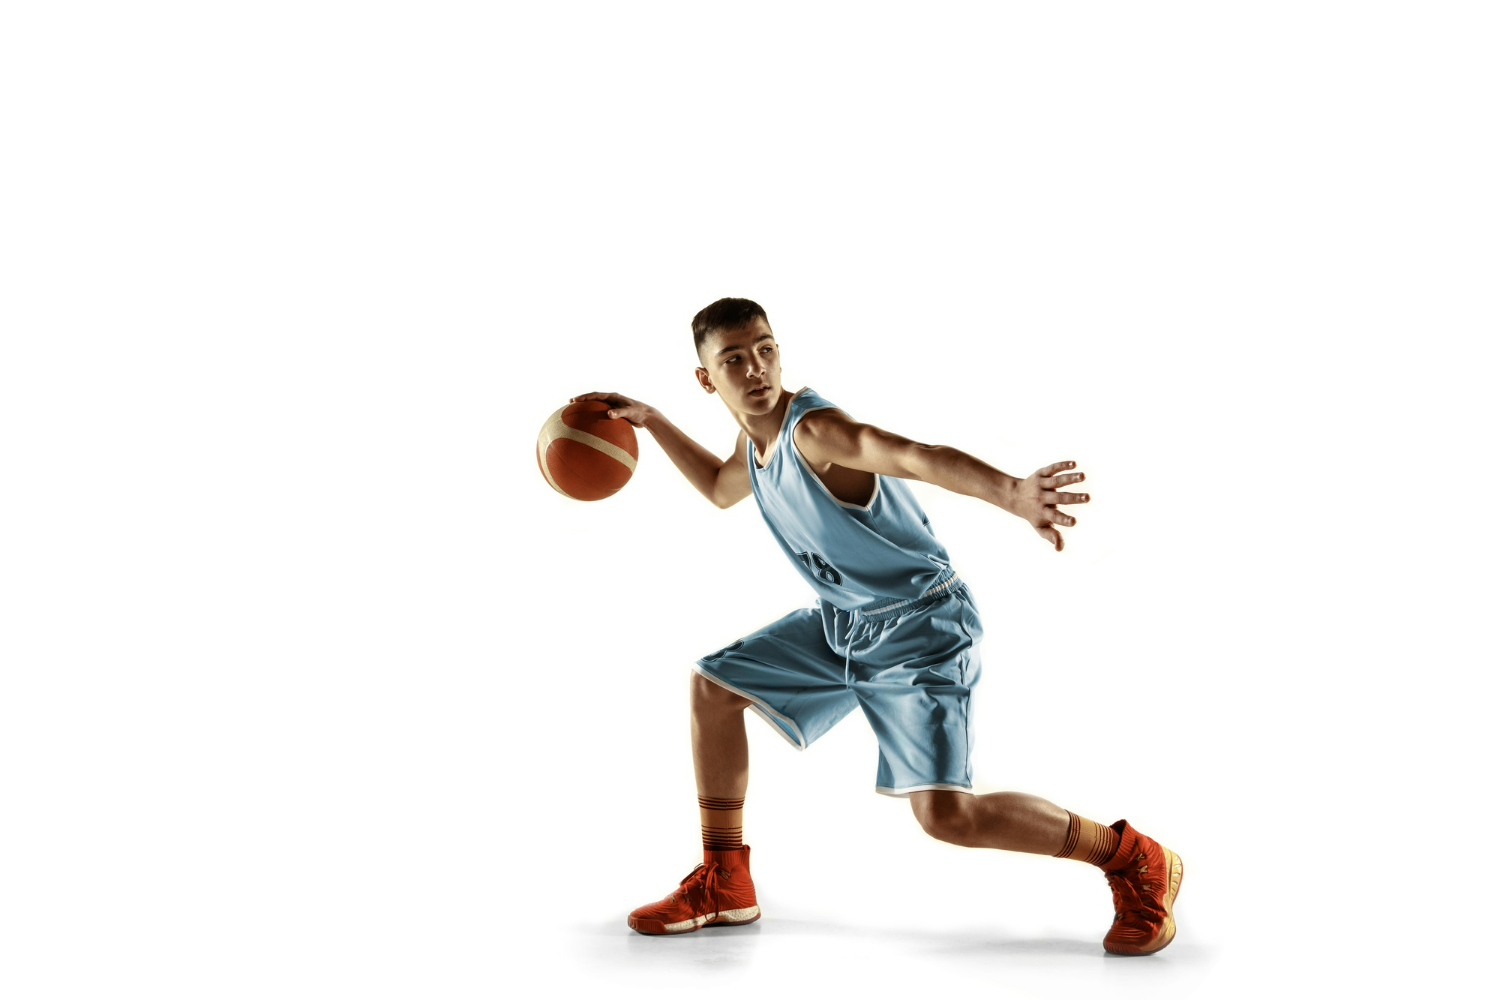 https://teamwinbasketball.com/wp-content/uploads/2023/07/full-length-portrait-young-basketball-player-with-ball-isolated-white.jpg